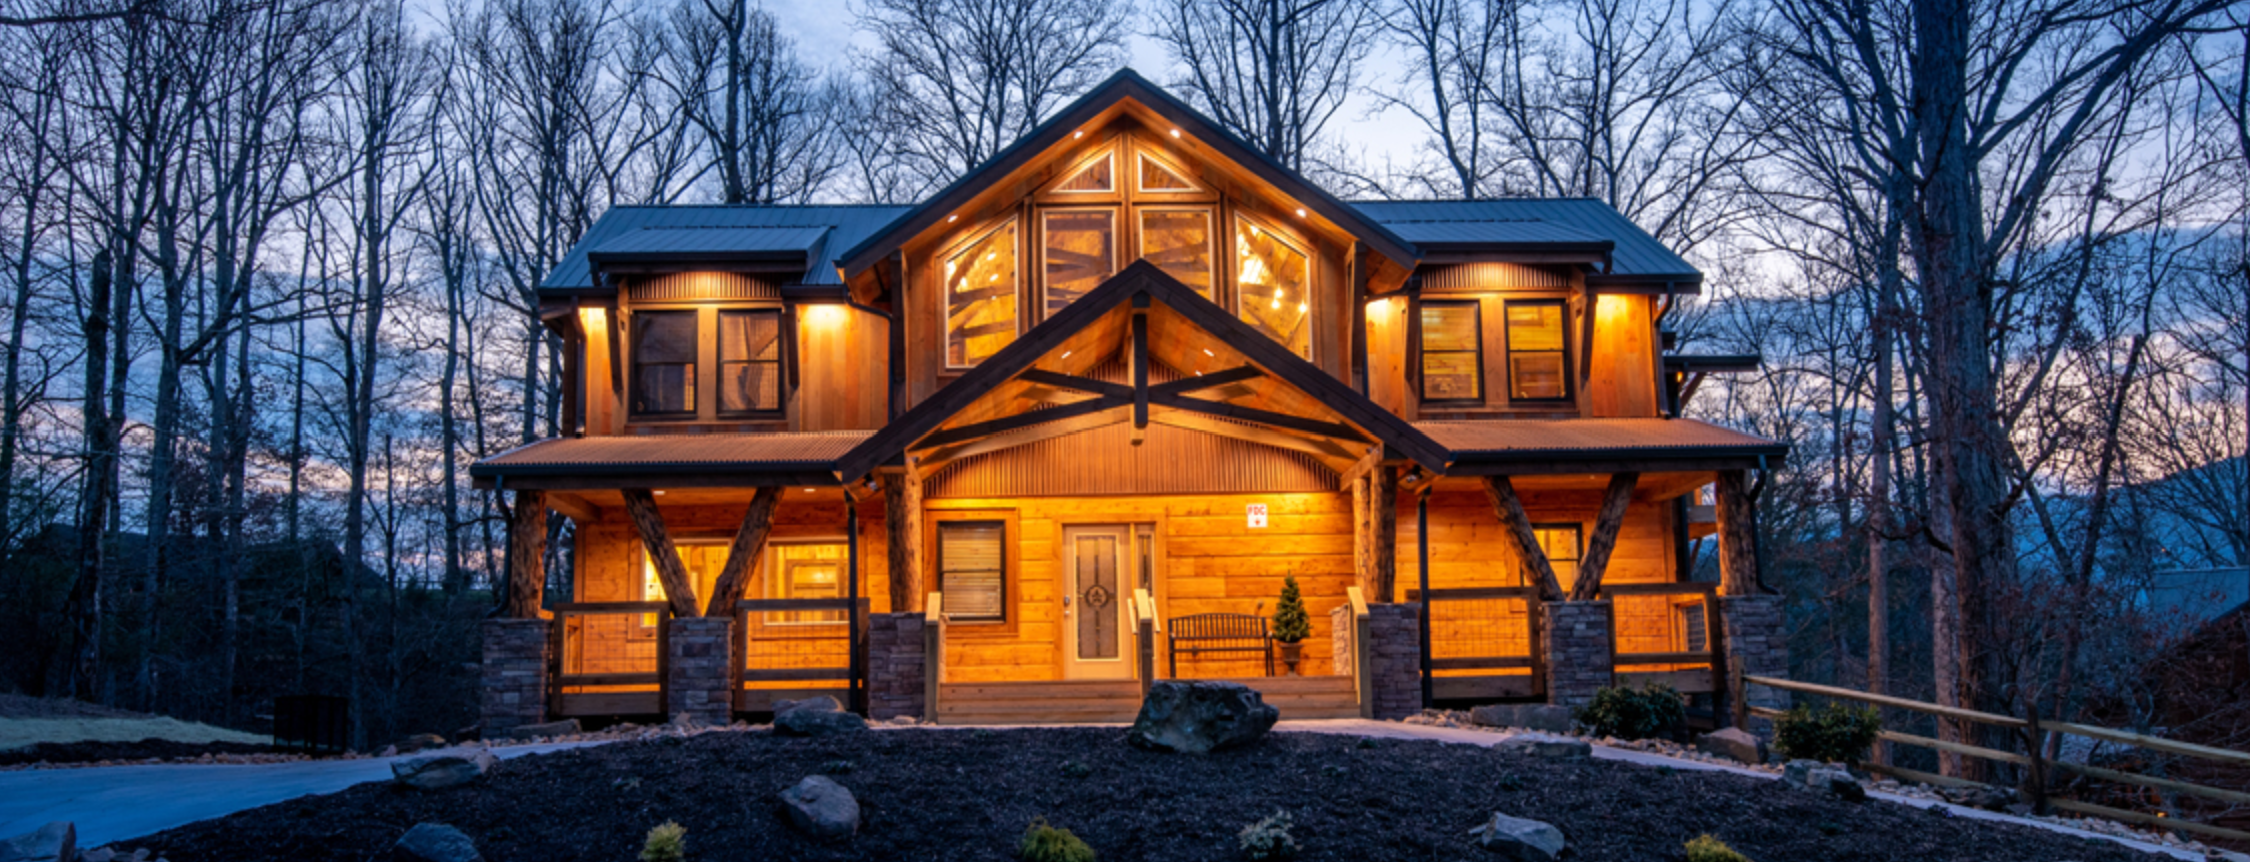 Cabins For You + Whimstay: Capturing New Audiences with Last-Minute Booking Solutions